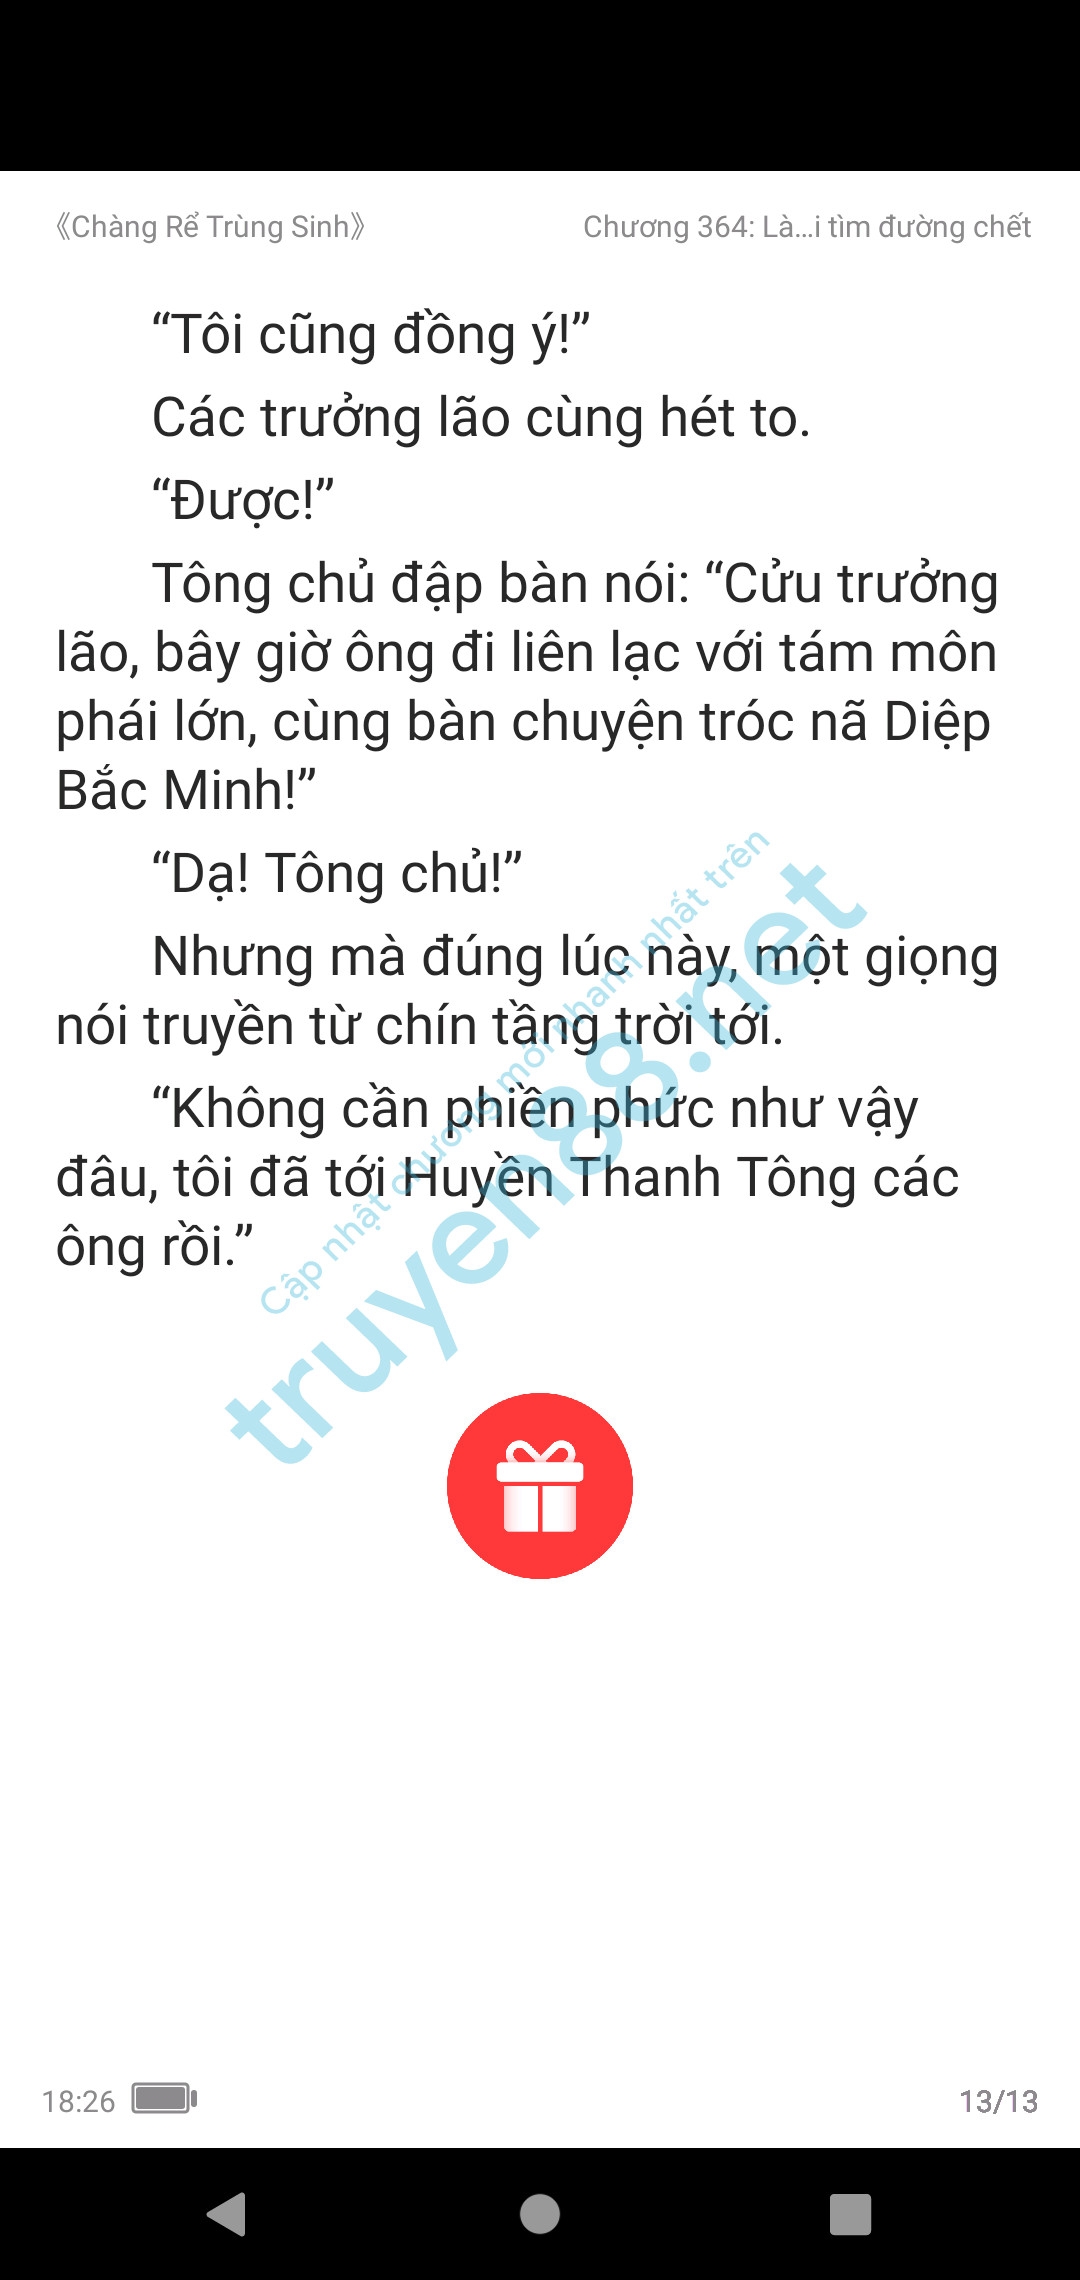 chang-re-trung-sinh-364-1